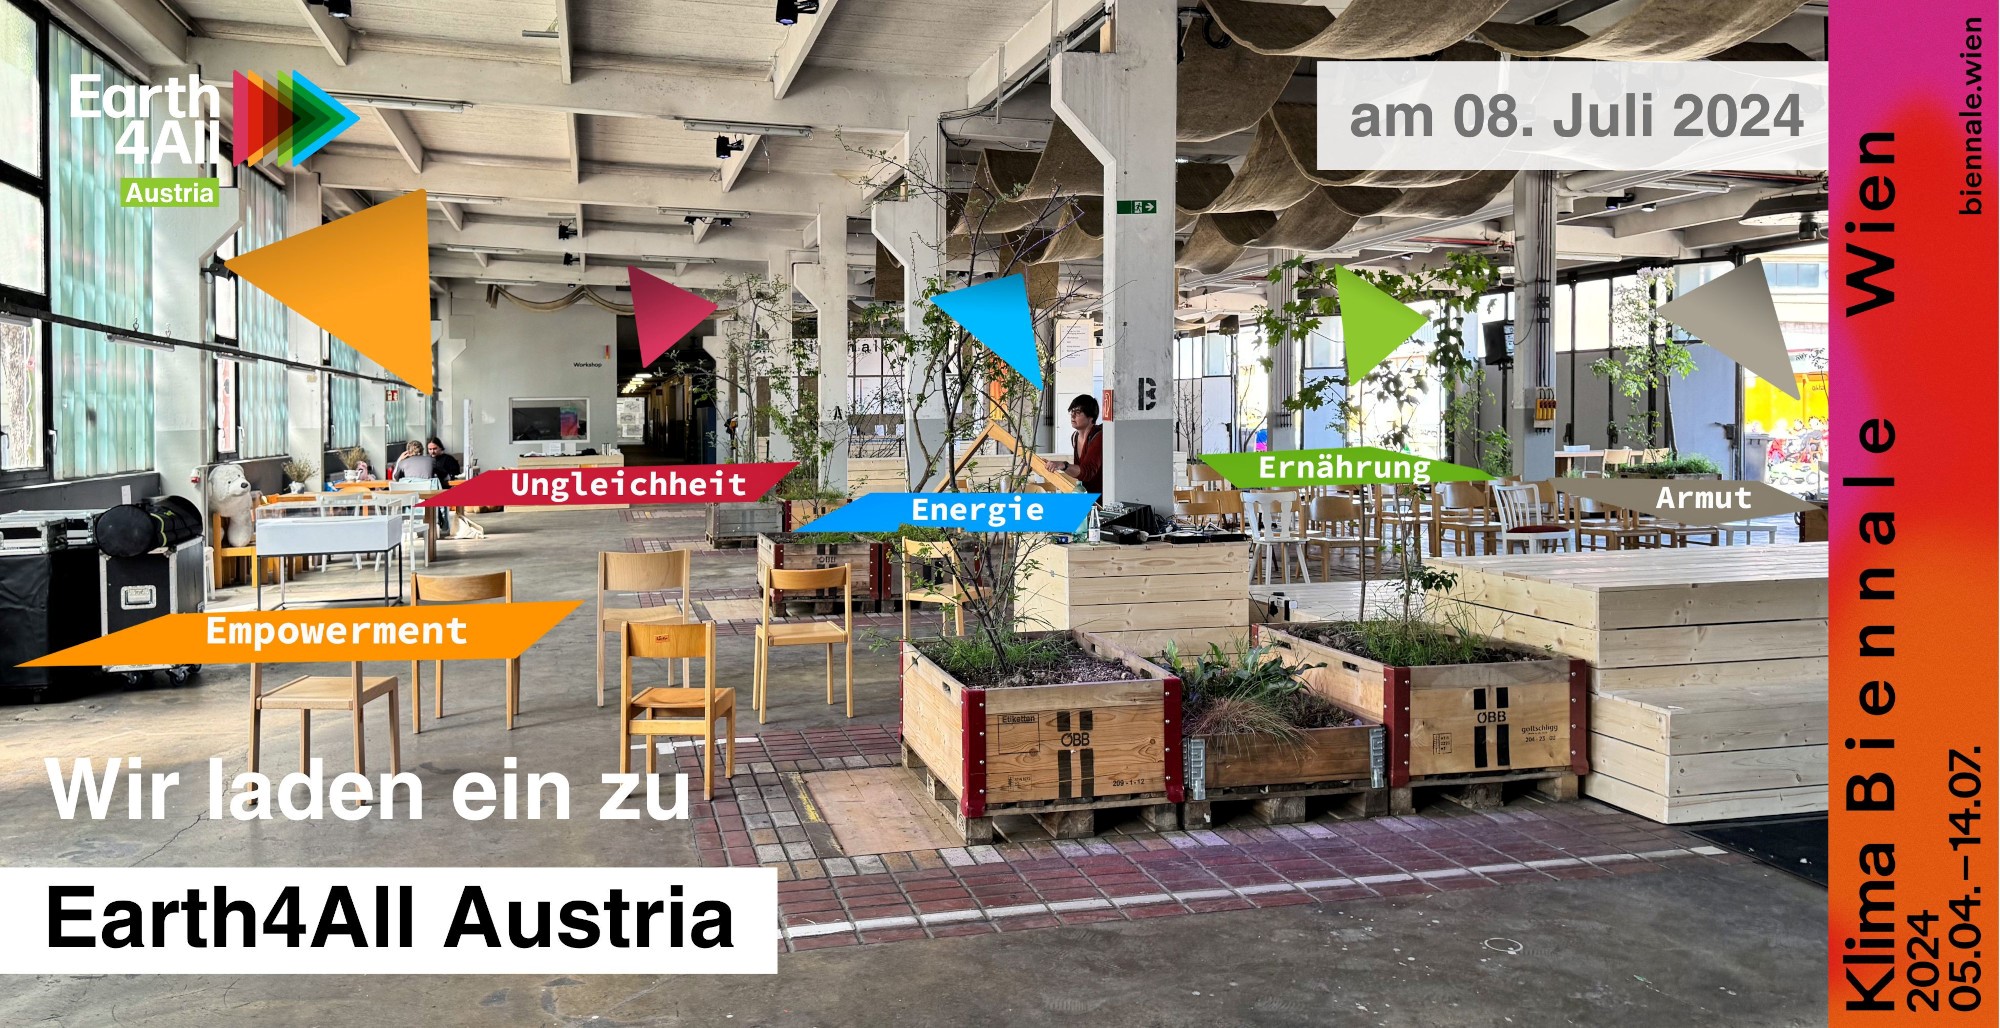 Earth4All Austria at the Vienna Climate Biennale